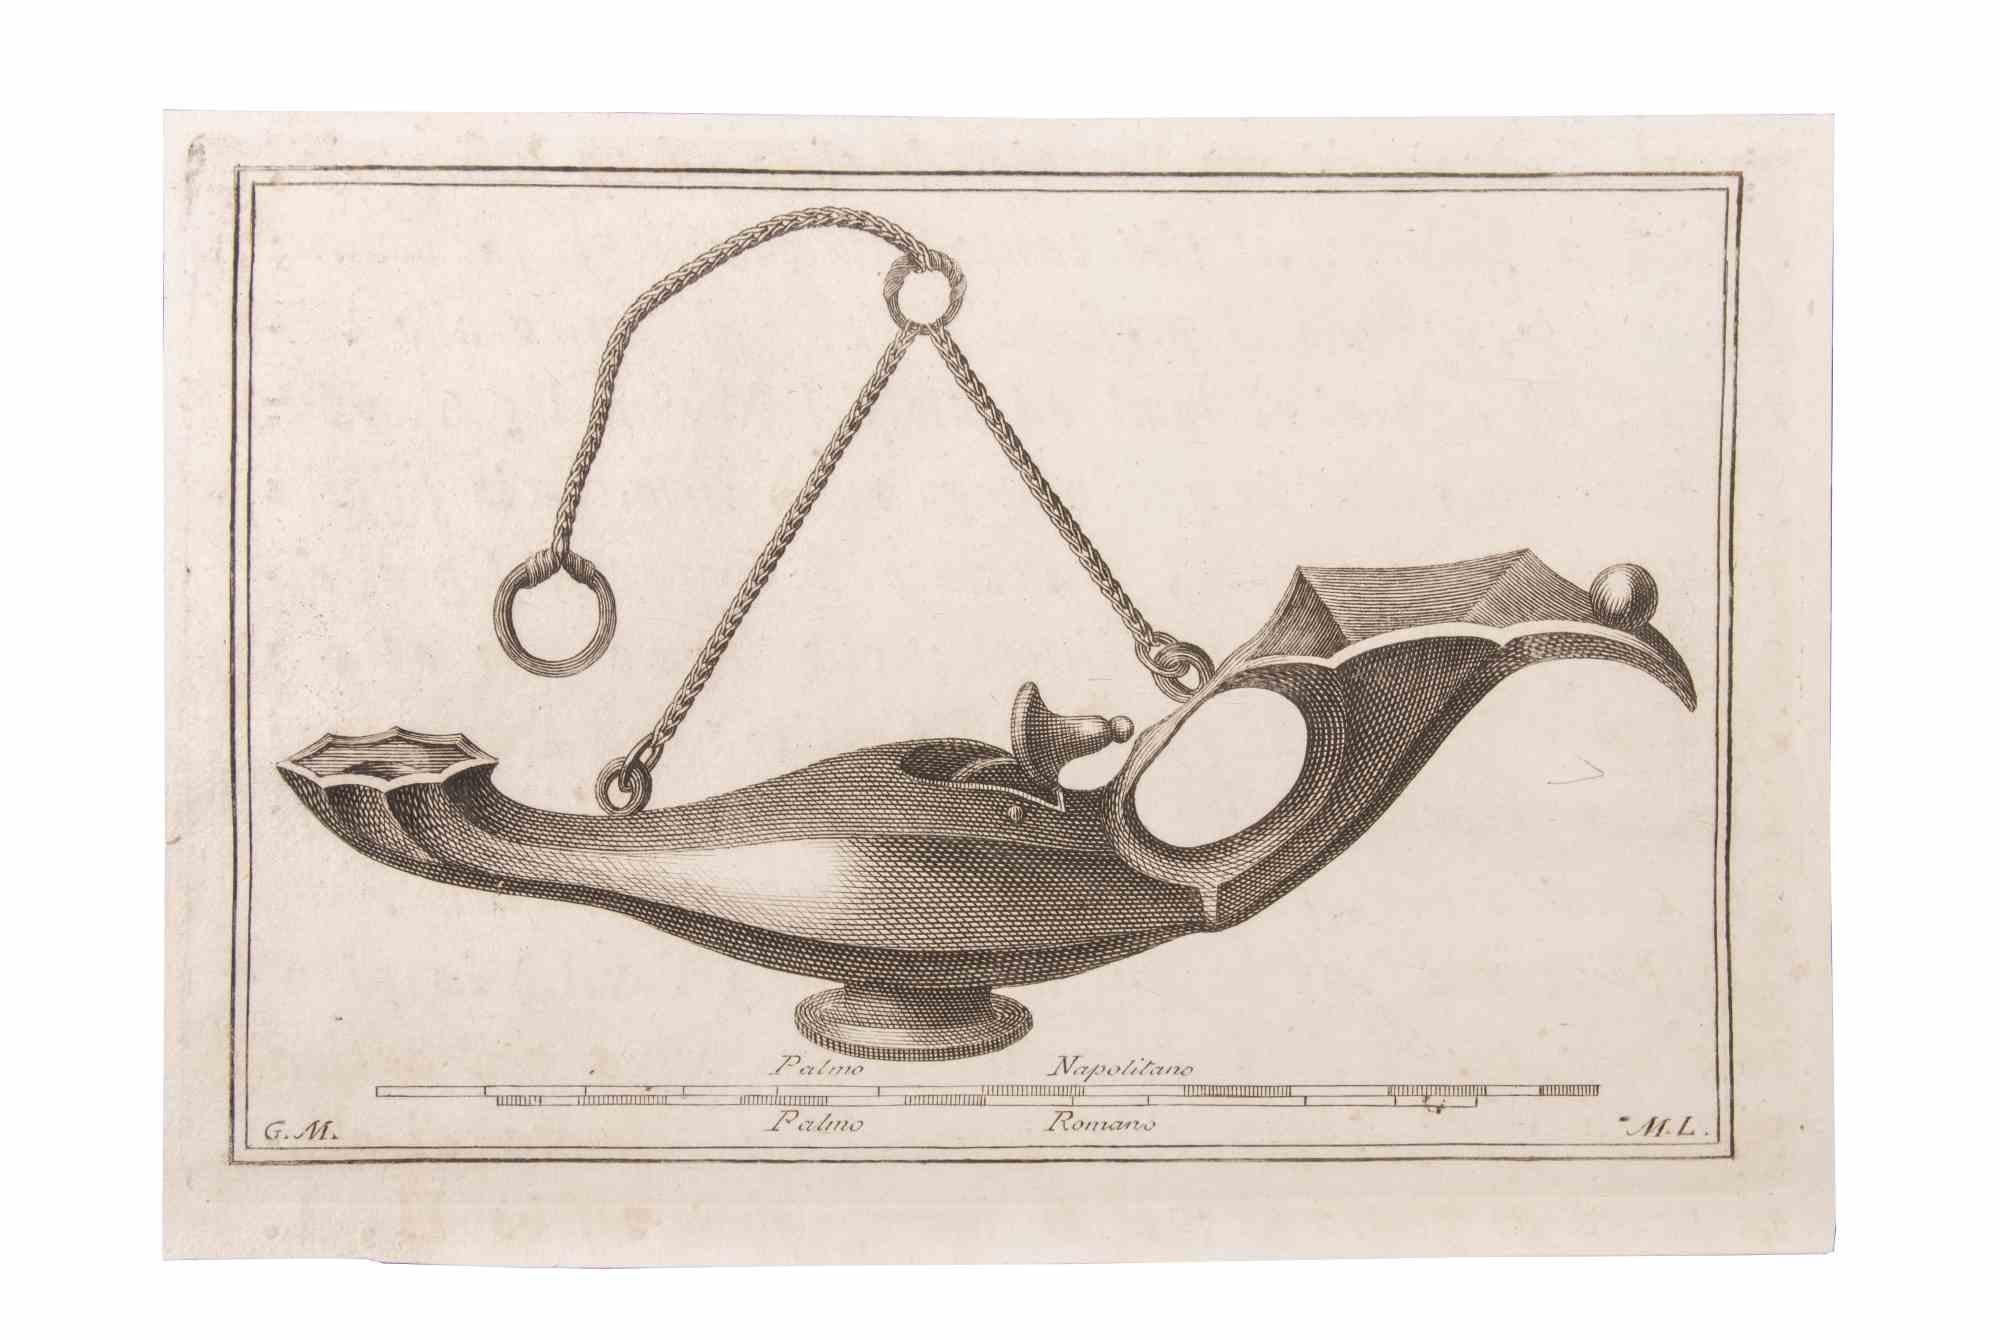 Pendant Lamp Made of Bronze is an Etching realized by Lorenzo Mangini (18th century).

The etching belongs to the print suite “Antiquities of Herculaneum Exposed” (original title: “Le Antichità di Ercolano Esposte”), an eight-volume volume of